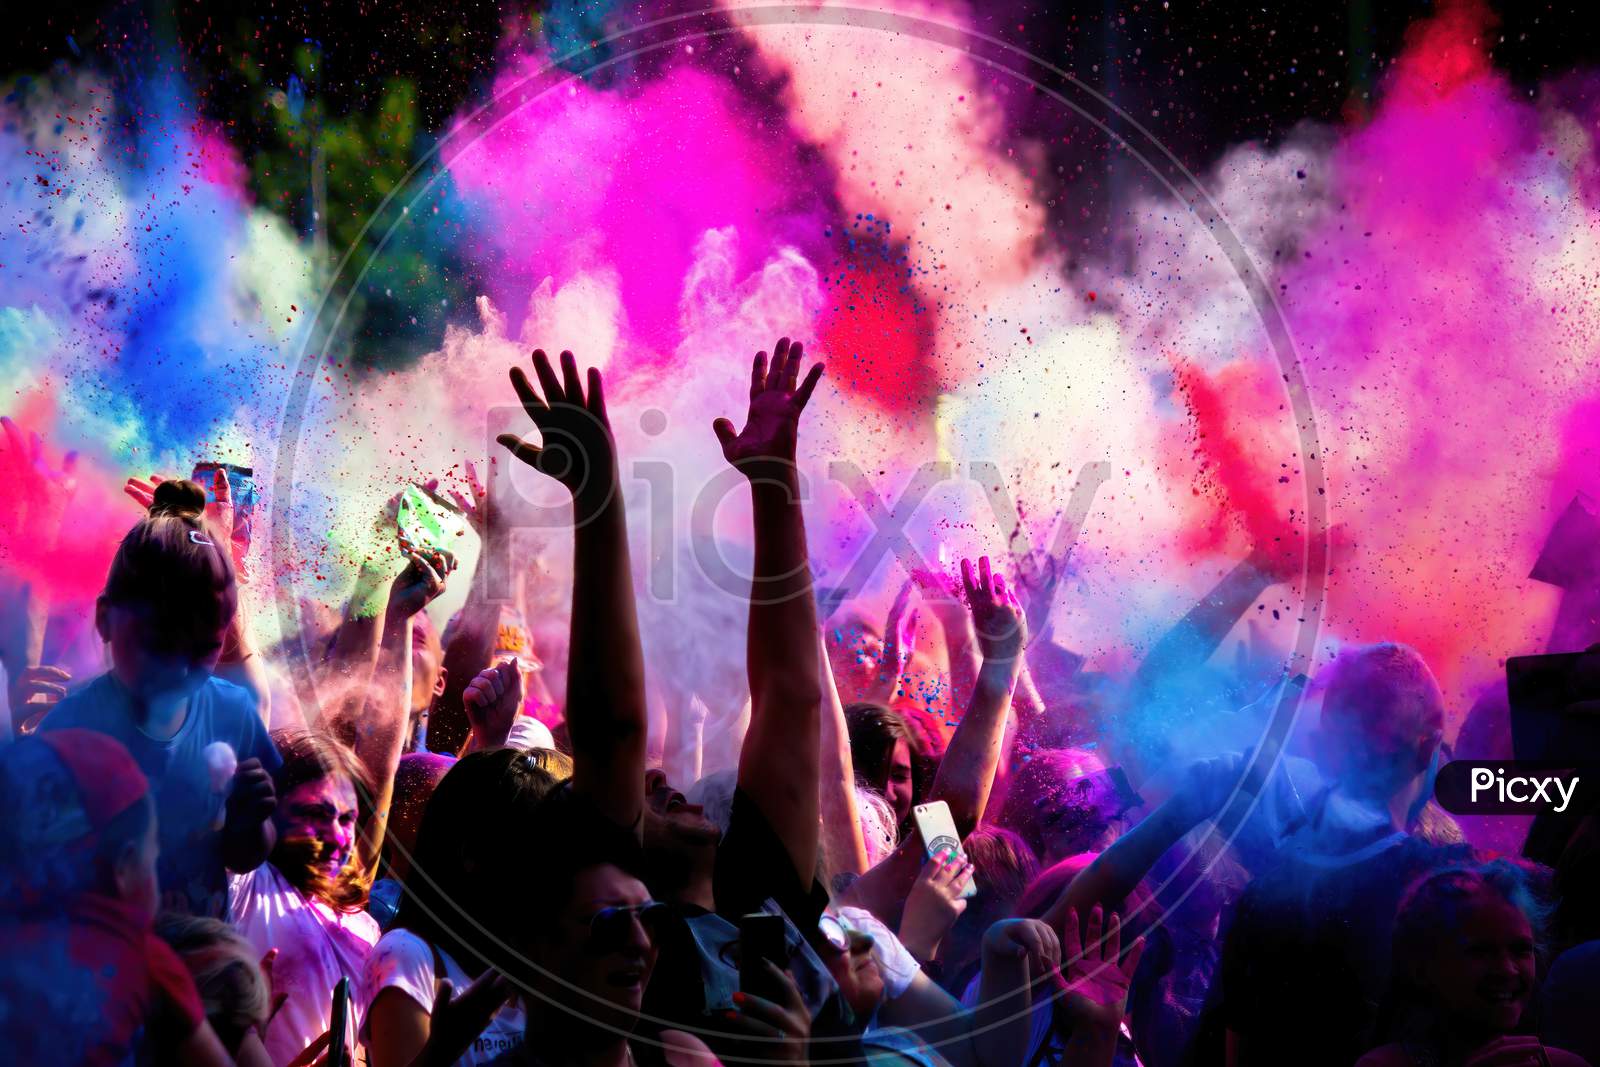 Krakow, Poland - August 25, 2019: Unidentified People Playing With Colors During Hindu Festival Holi. Hands Are Visible Throwing Colors In The Air